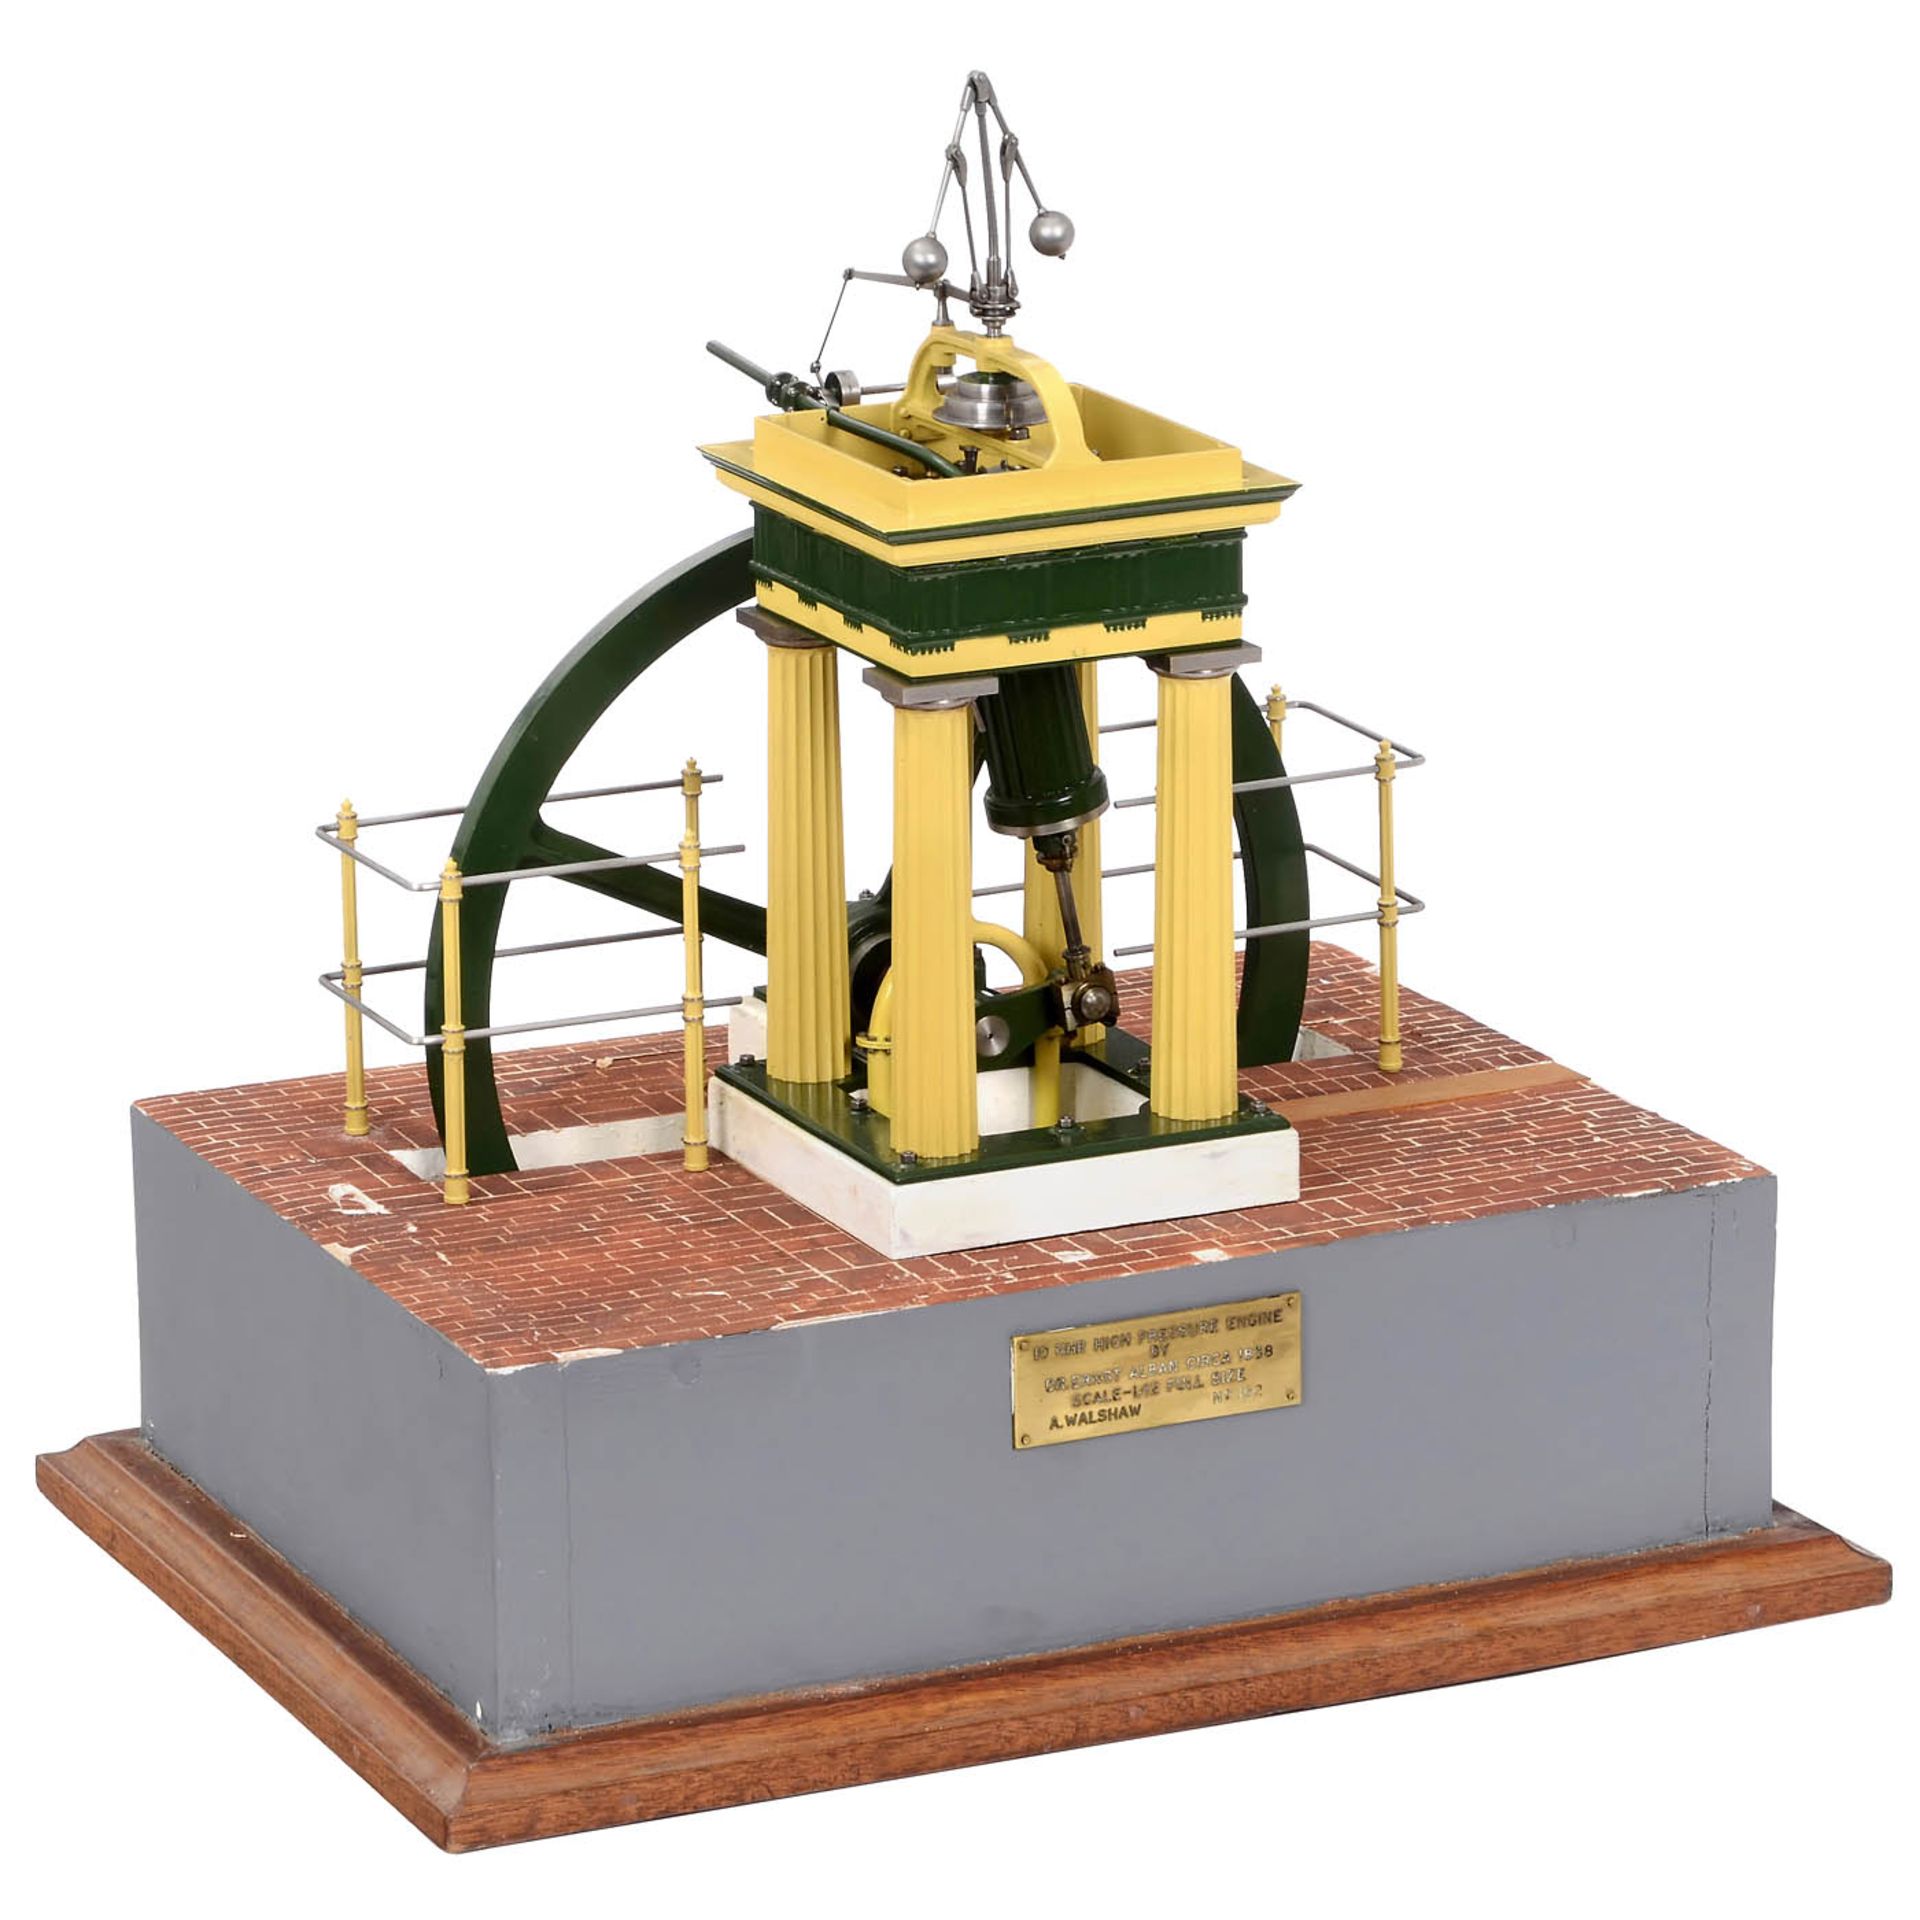 1:12 Scale Model of a High-Pressure Steam Engine Designed by Dr. Ernst Alban - Image 2 of 3